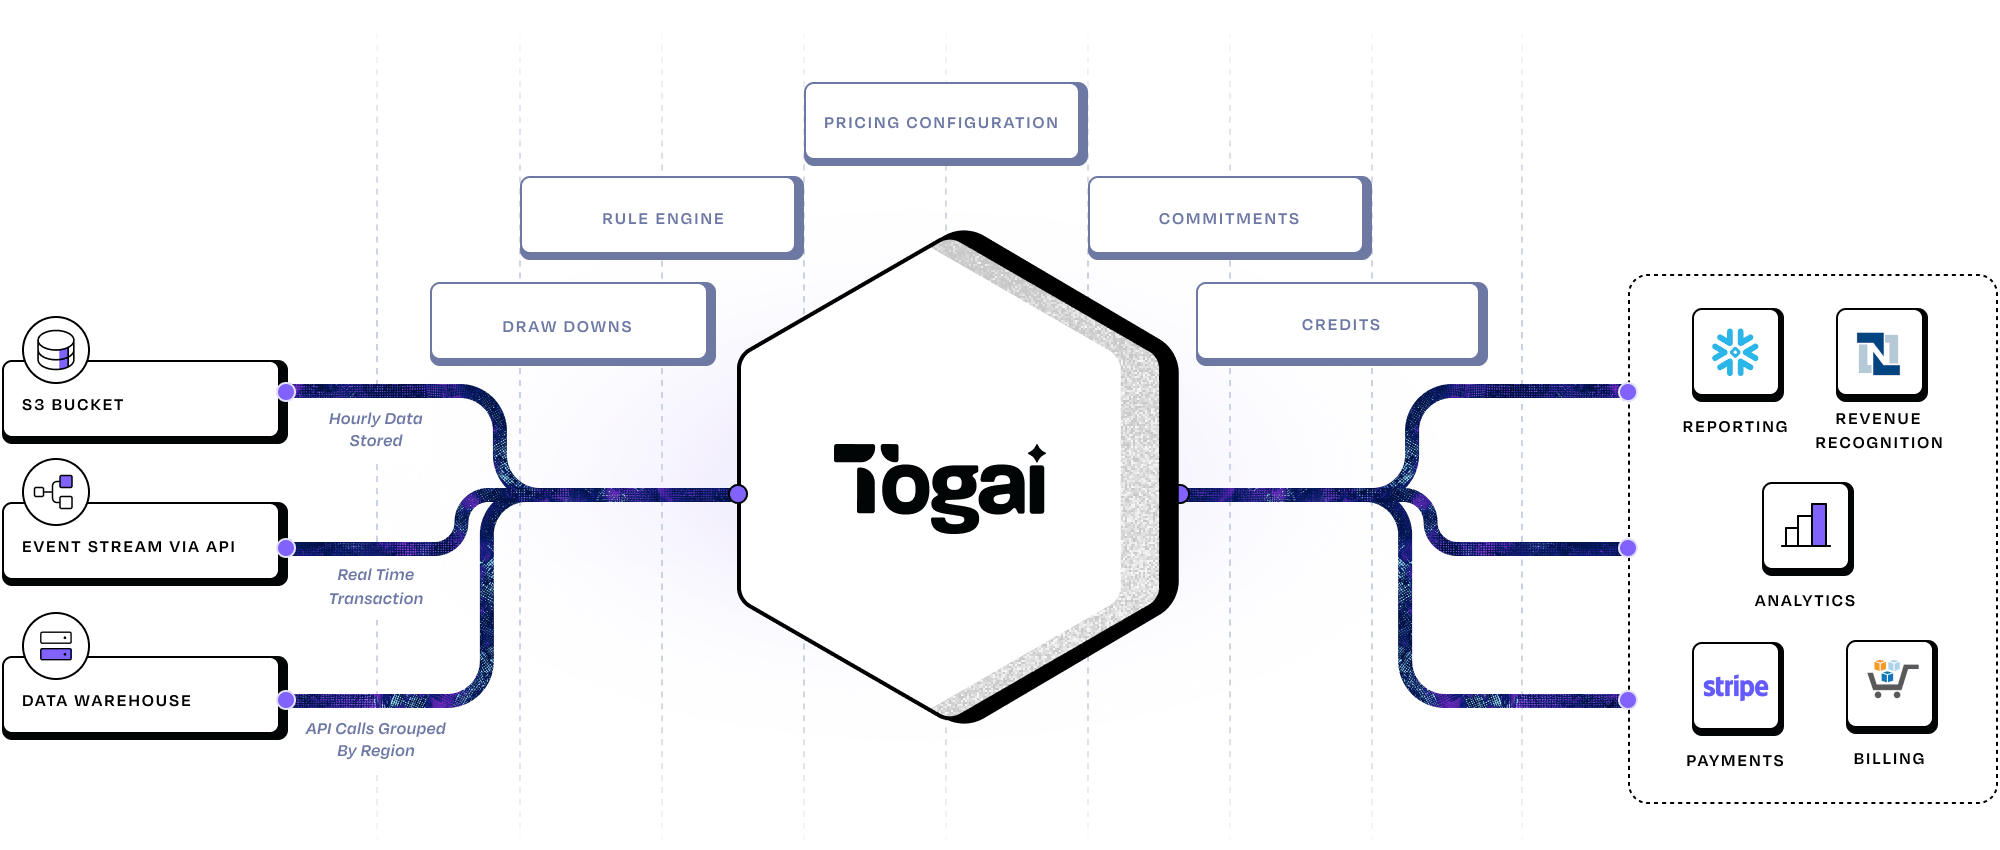 The image showing the architecture of Togai.